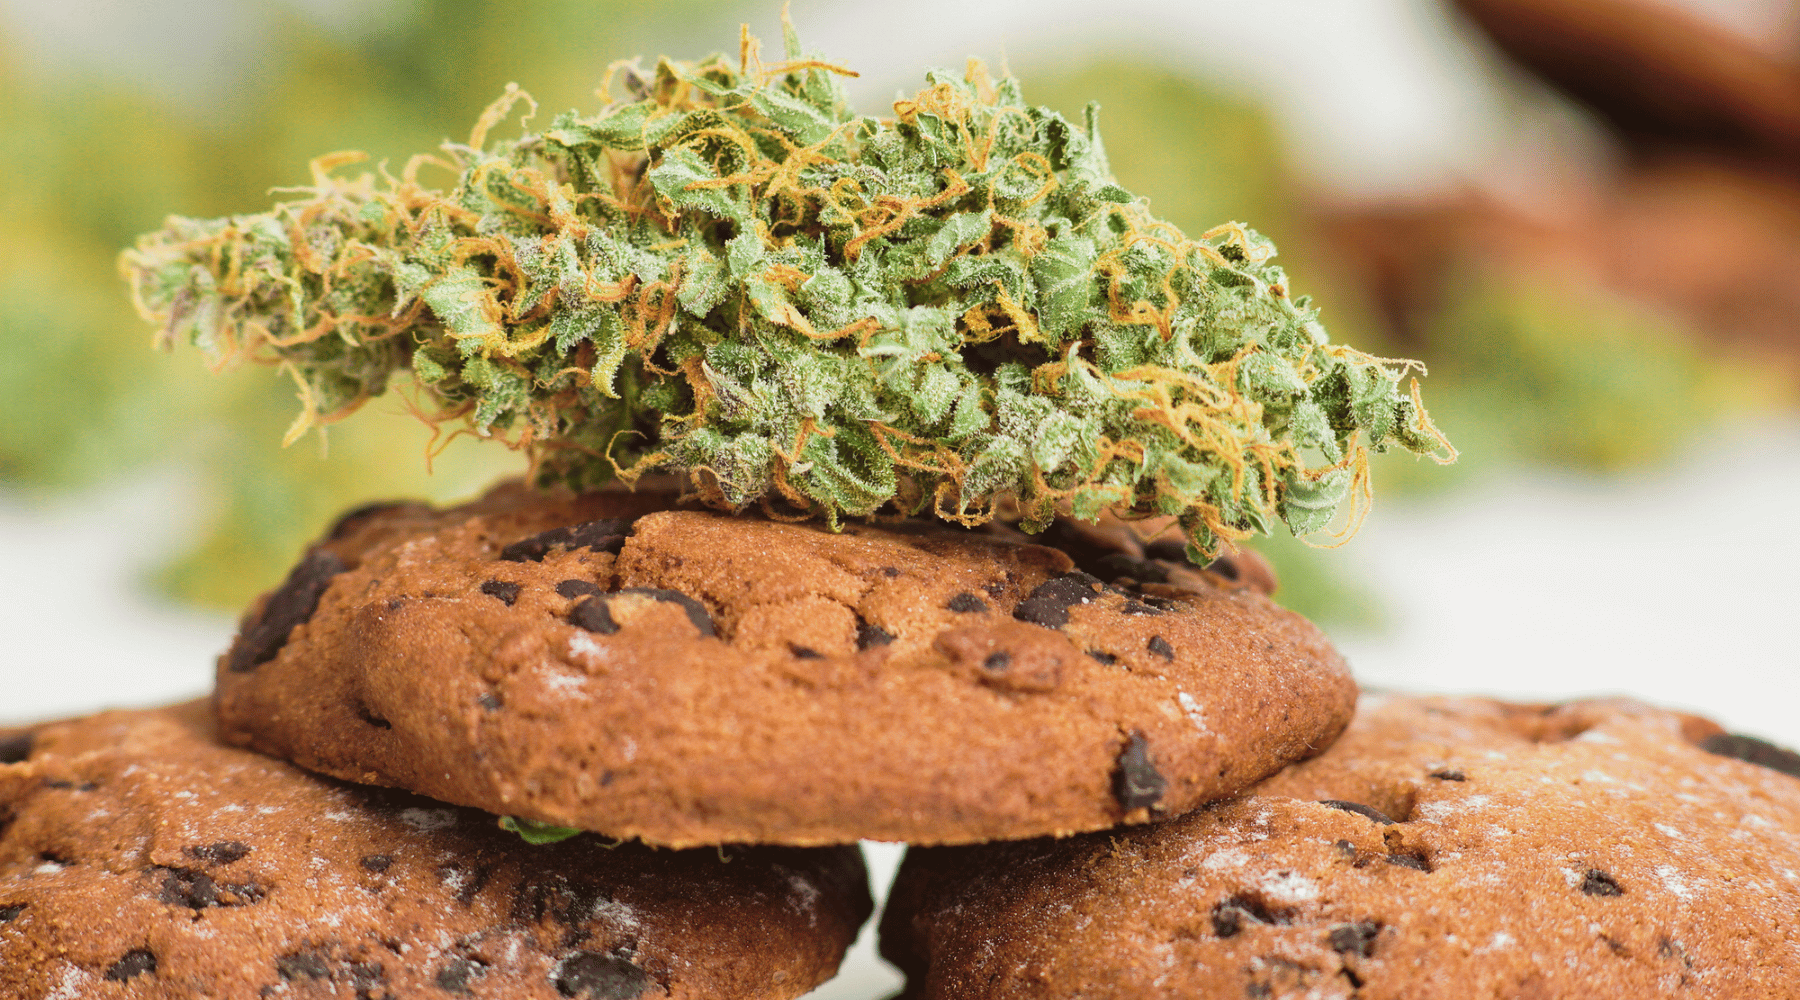 Does weed have calories?